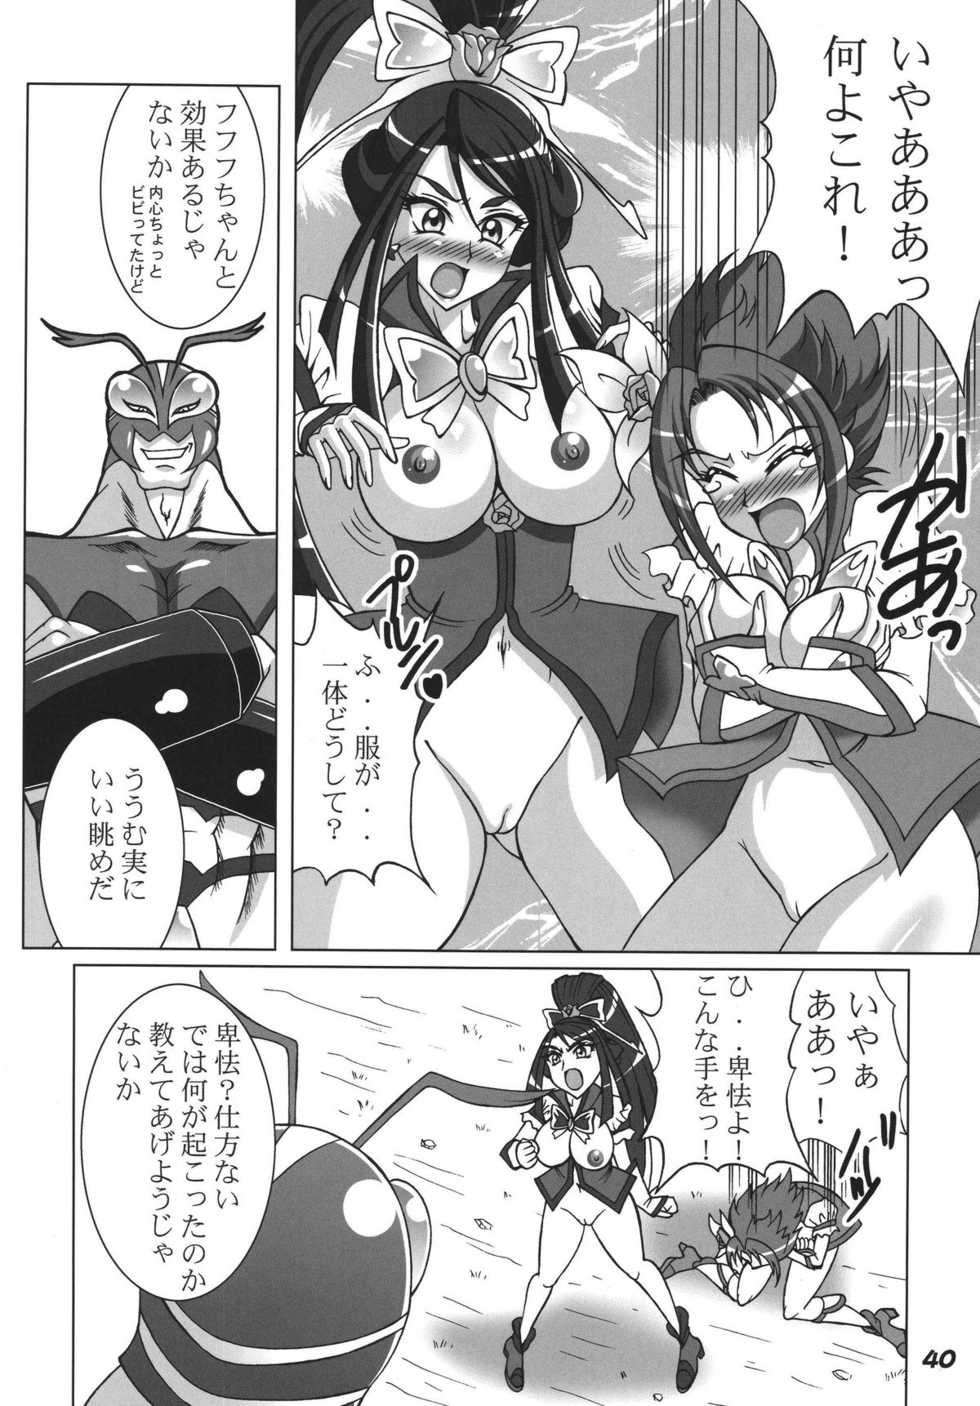 [RPG COMPANY 2 (Various)] Precure 555 (Yes! Precure 5) [Digital] - Page 40